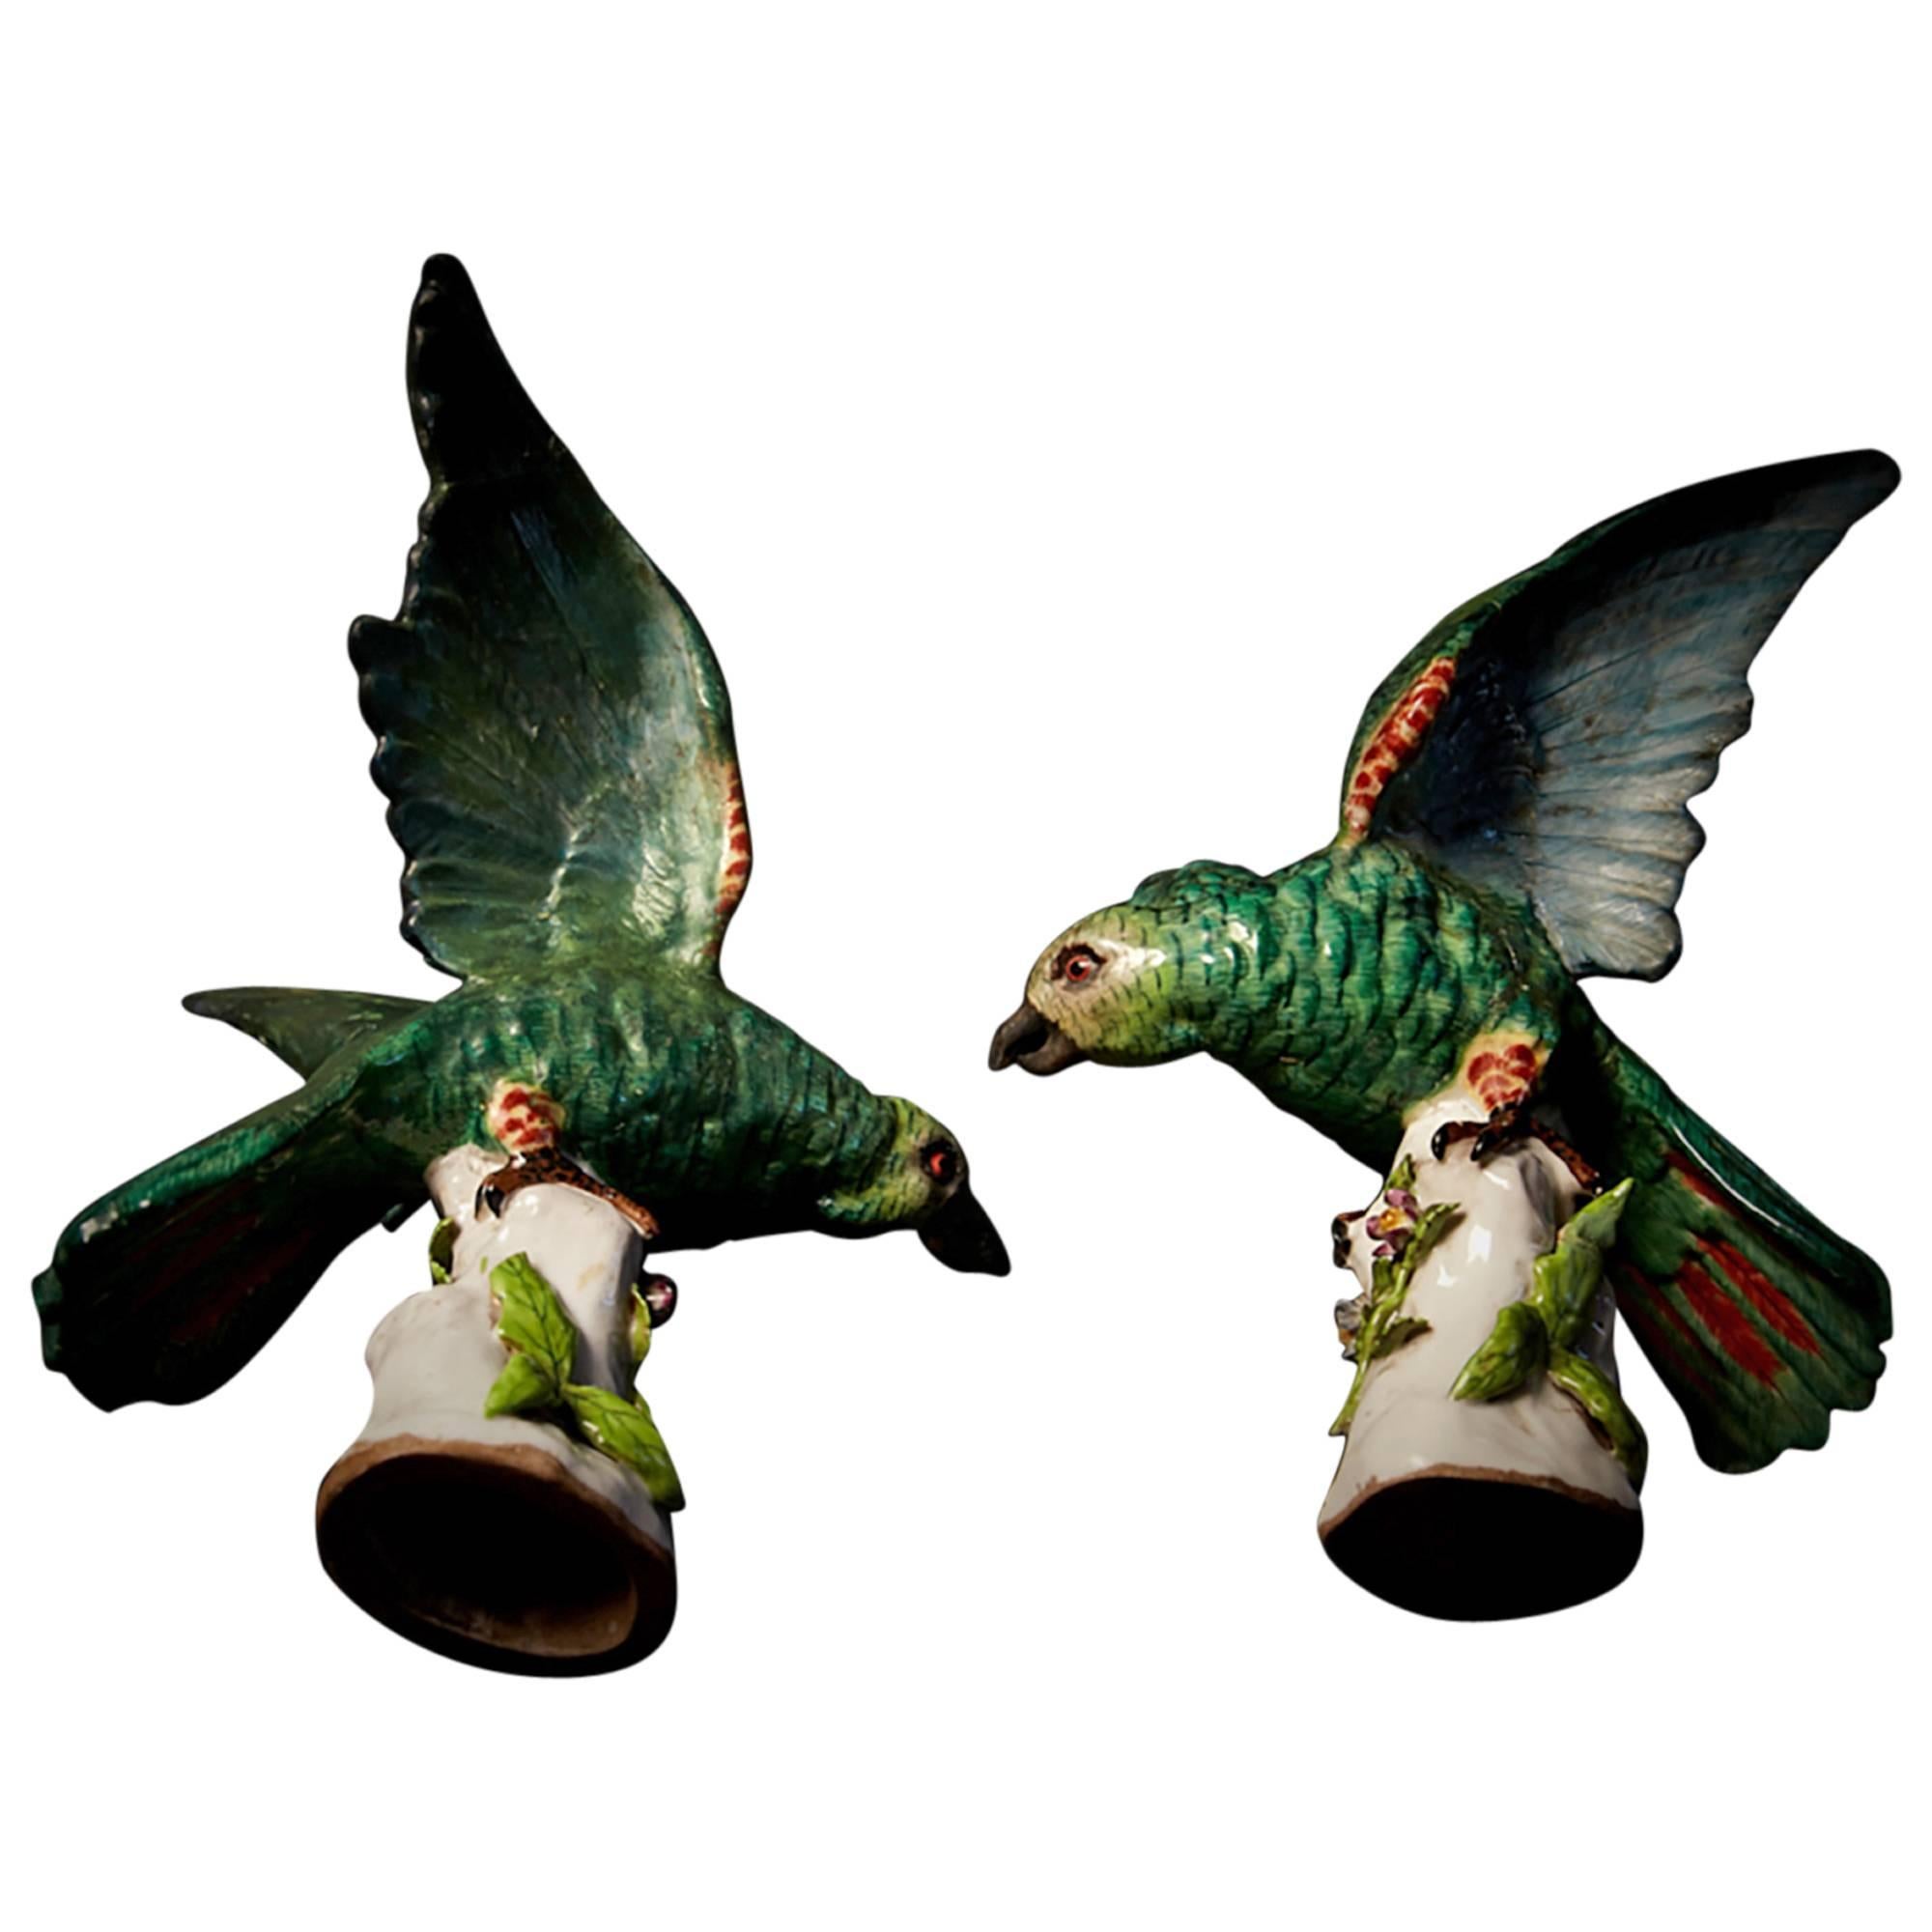 Evocative, dramatic pieces, these parrots have exceptional vitality and energy. The patina and color are quite lovely. Evidence of extensive restoration is visible, but this does not deter from their decorative value. They would look striking in any